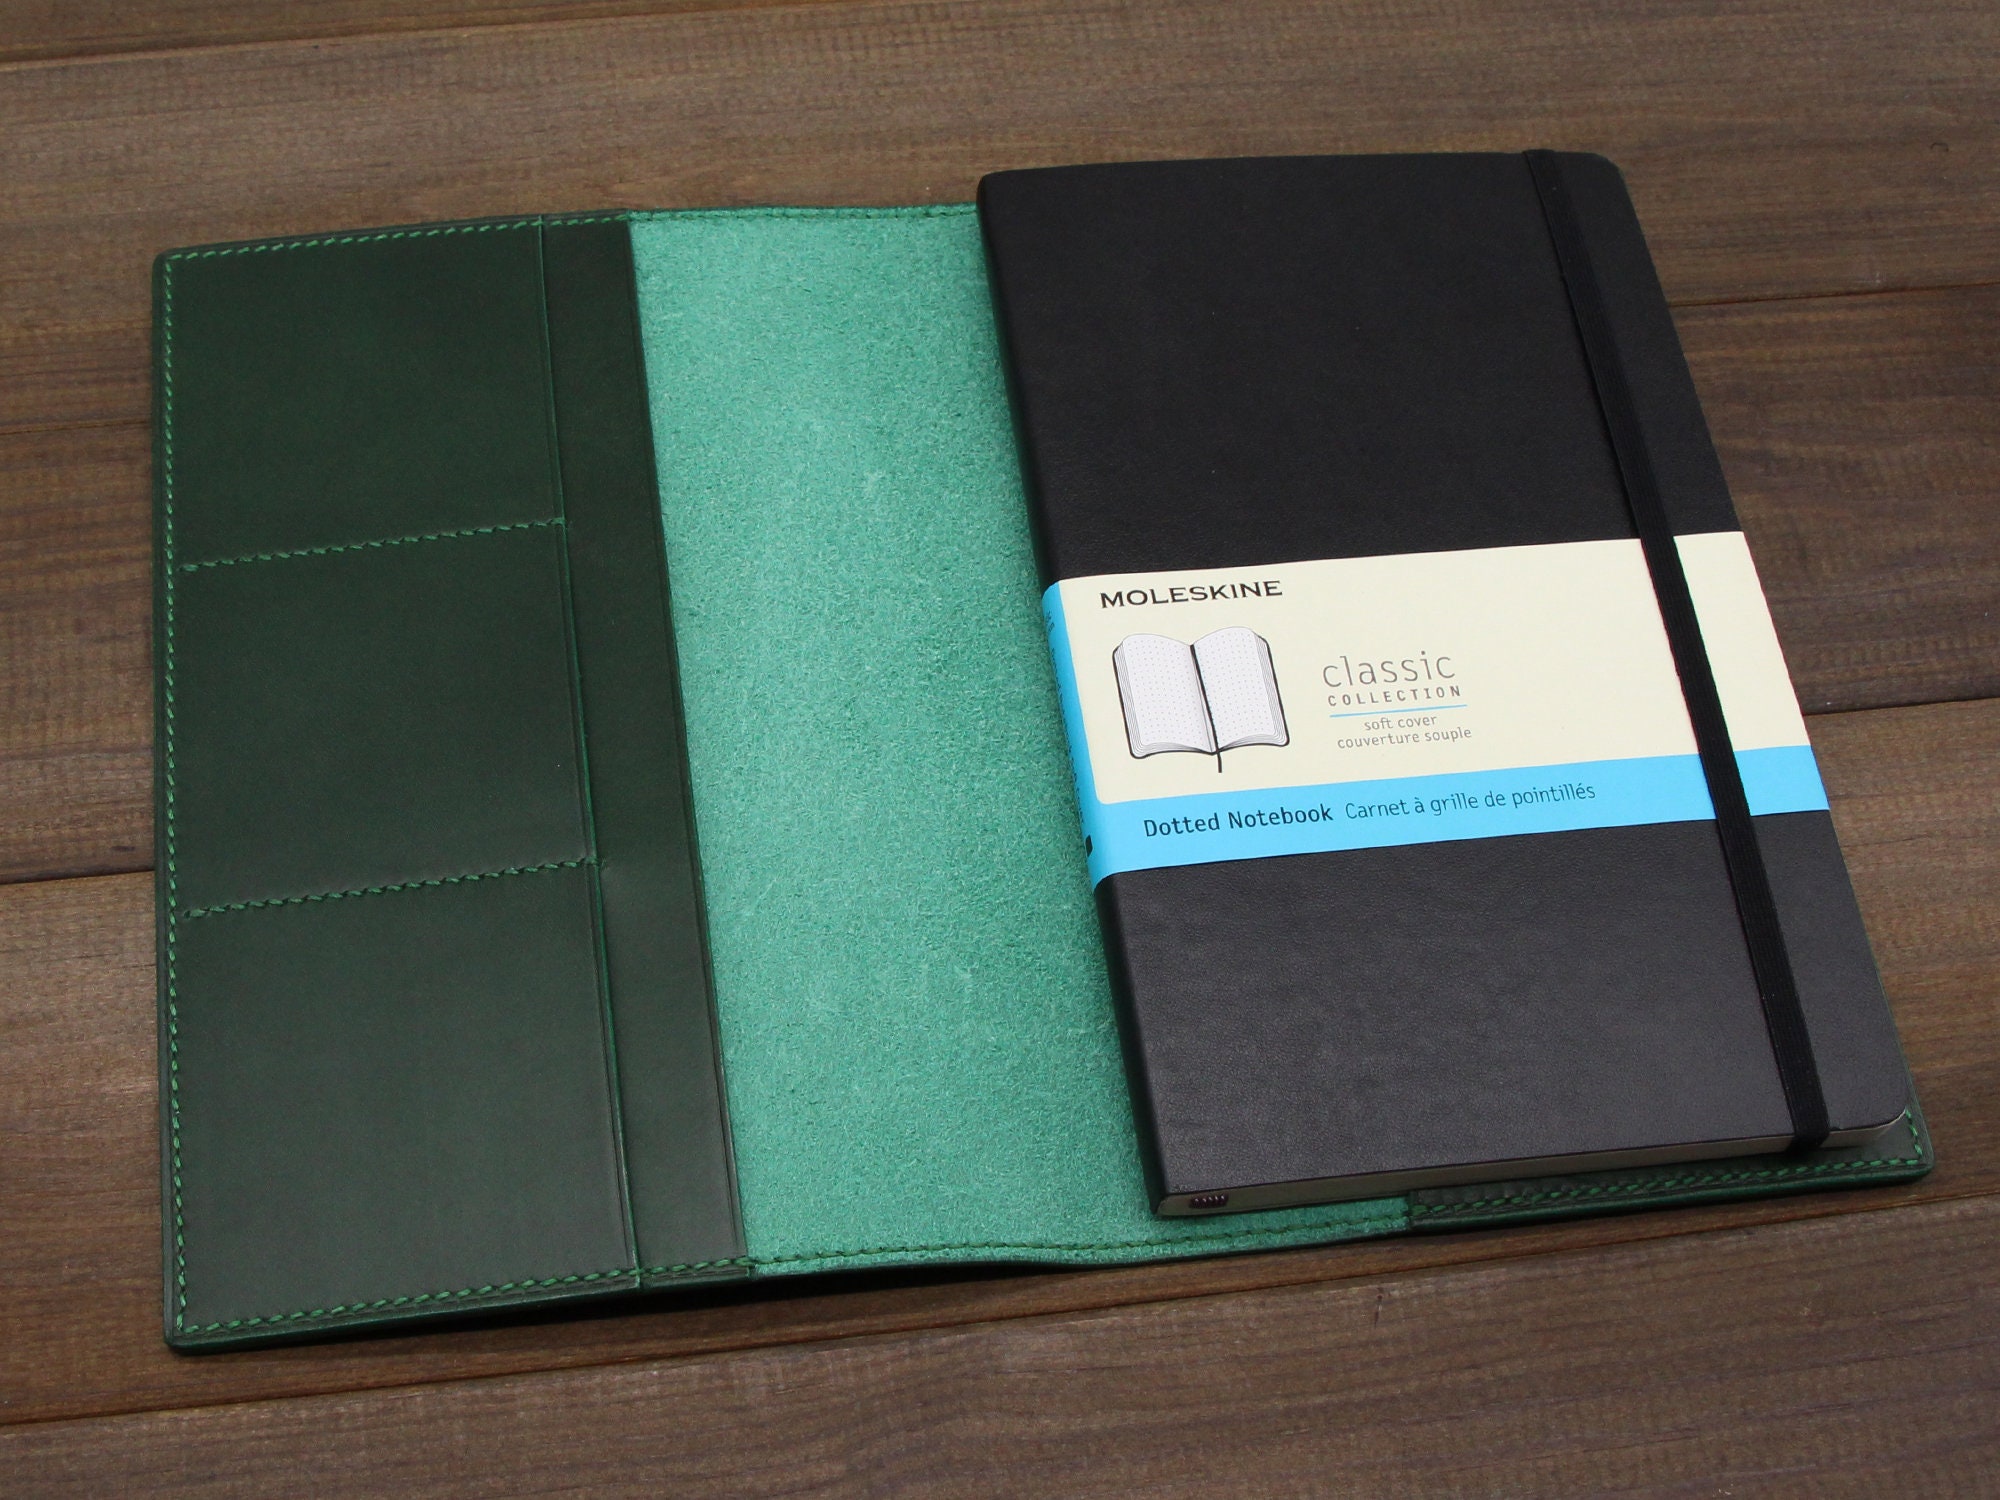 Moleskine Classic Collection Large dotted notebook review + pen test 